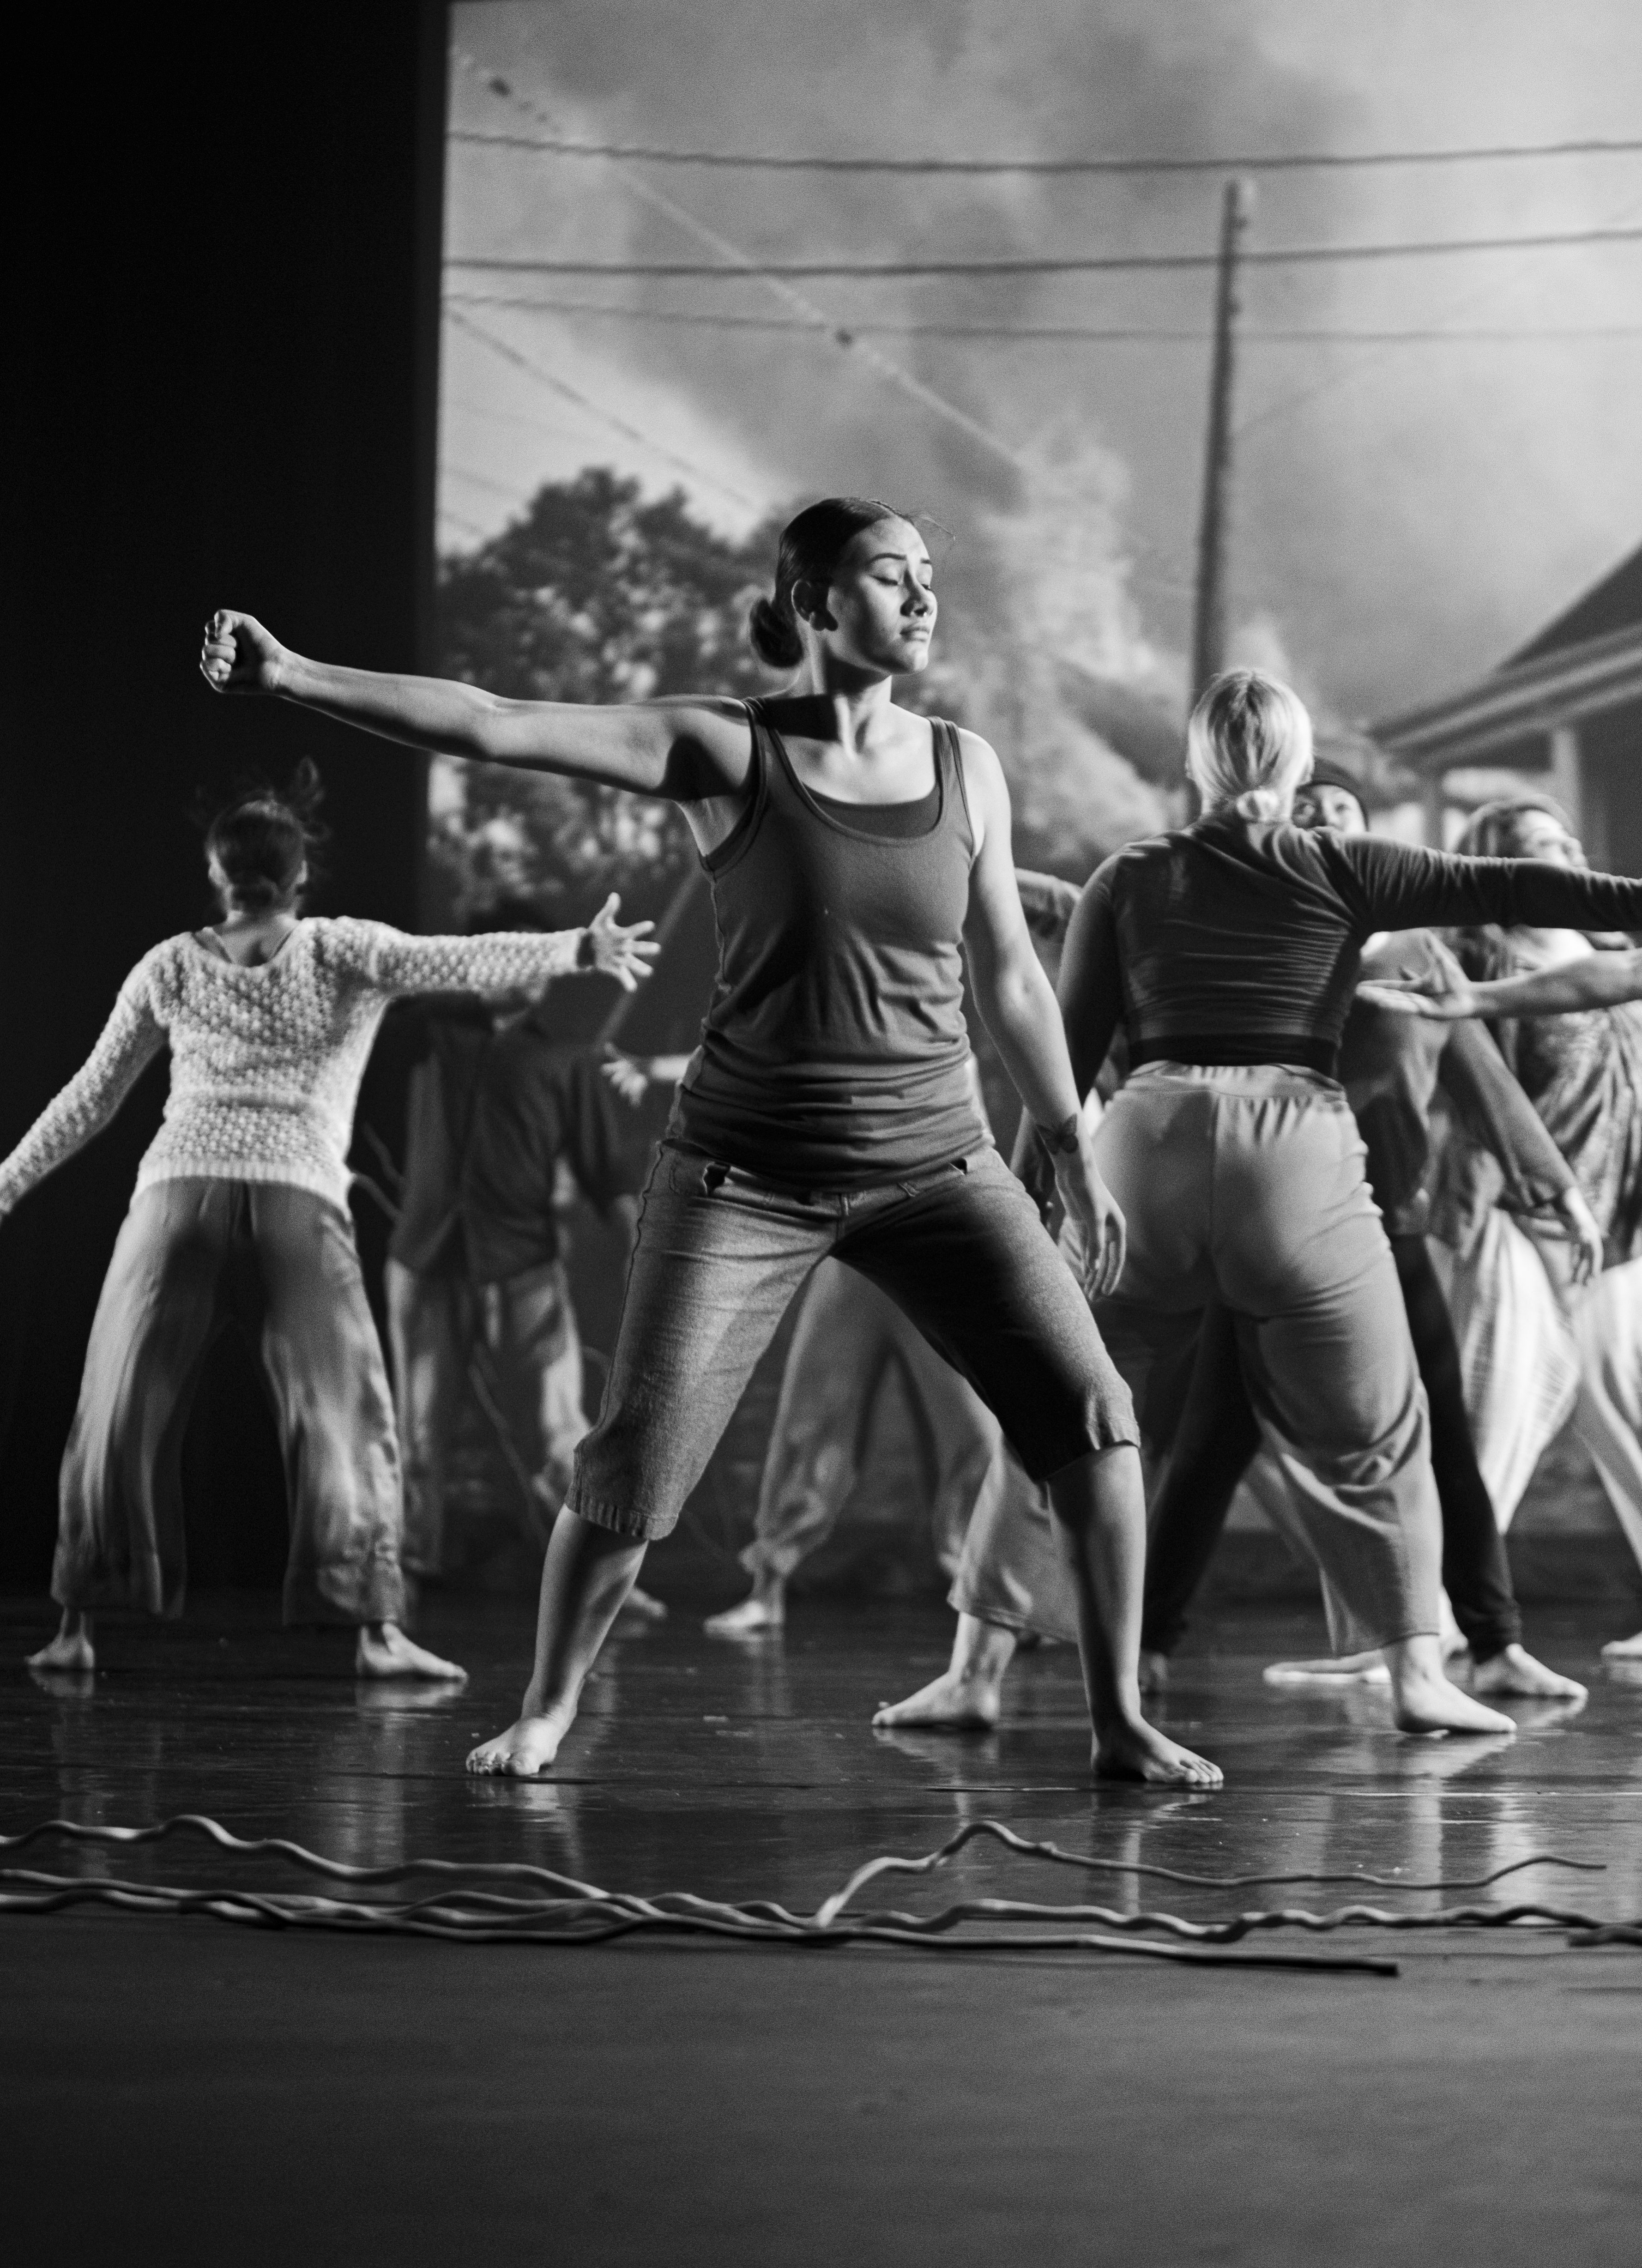 Mayra Toscano bring a powerful, emotional performance to choreographer Cyrian Reed's dance paying homage to Hurrican Katrina, "Levees - The Waters We Must Stand On." Ashley Ramynke / el Don